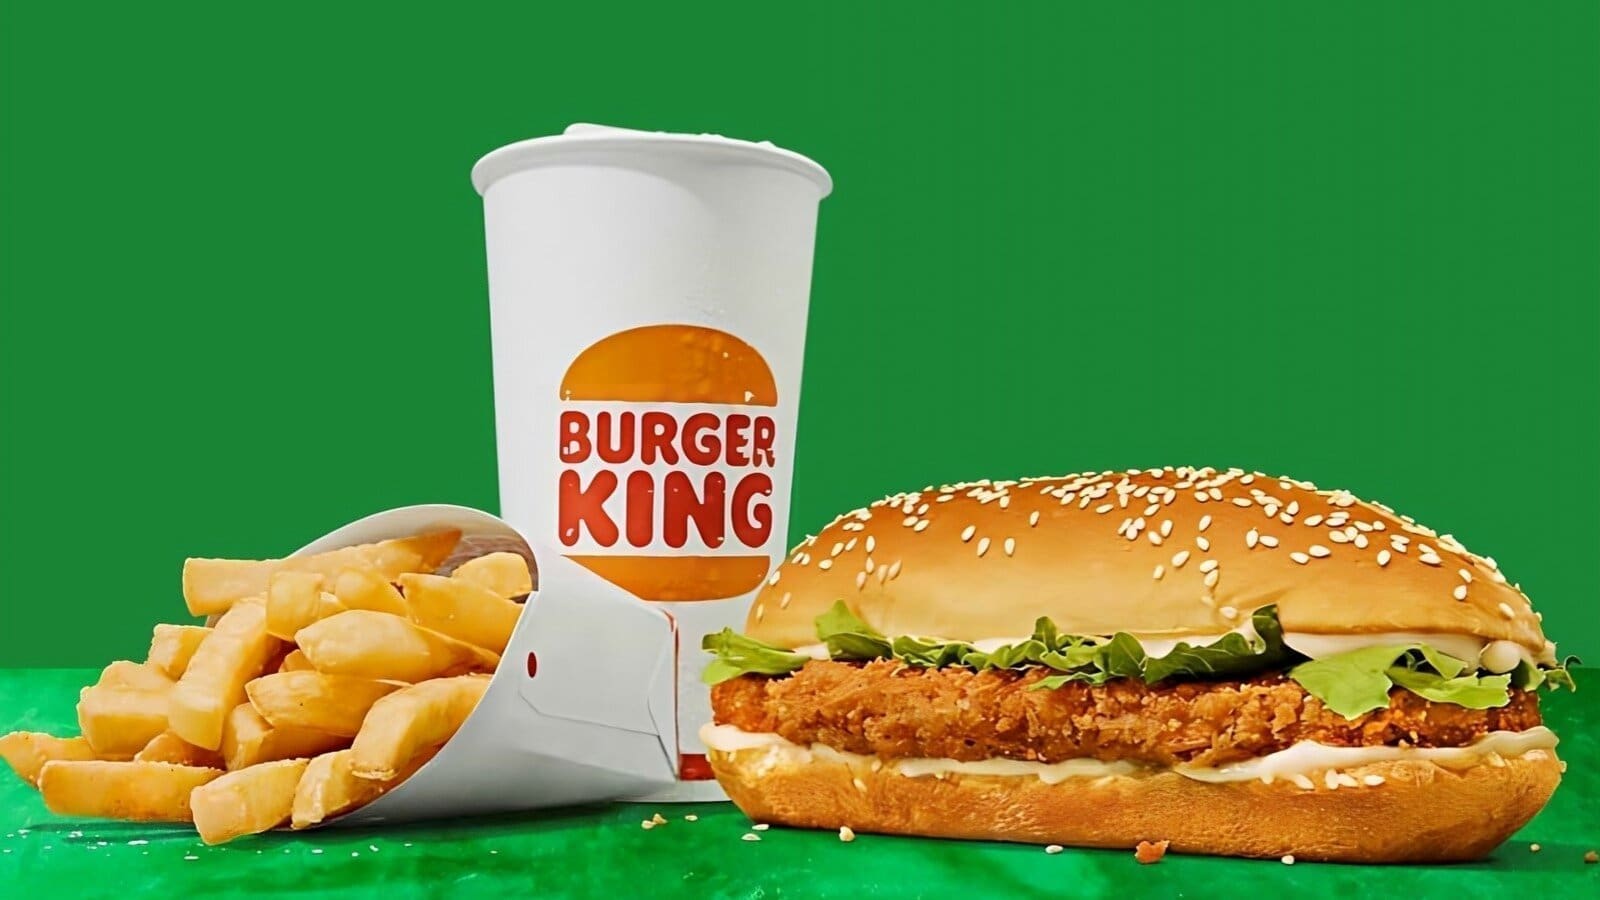 Burger King faces class action lawsuit for selling 35% less sized Whopper burger than in adverts